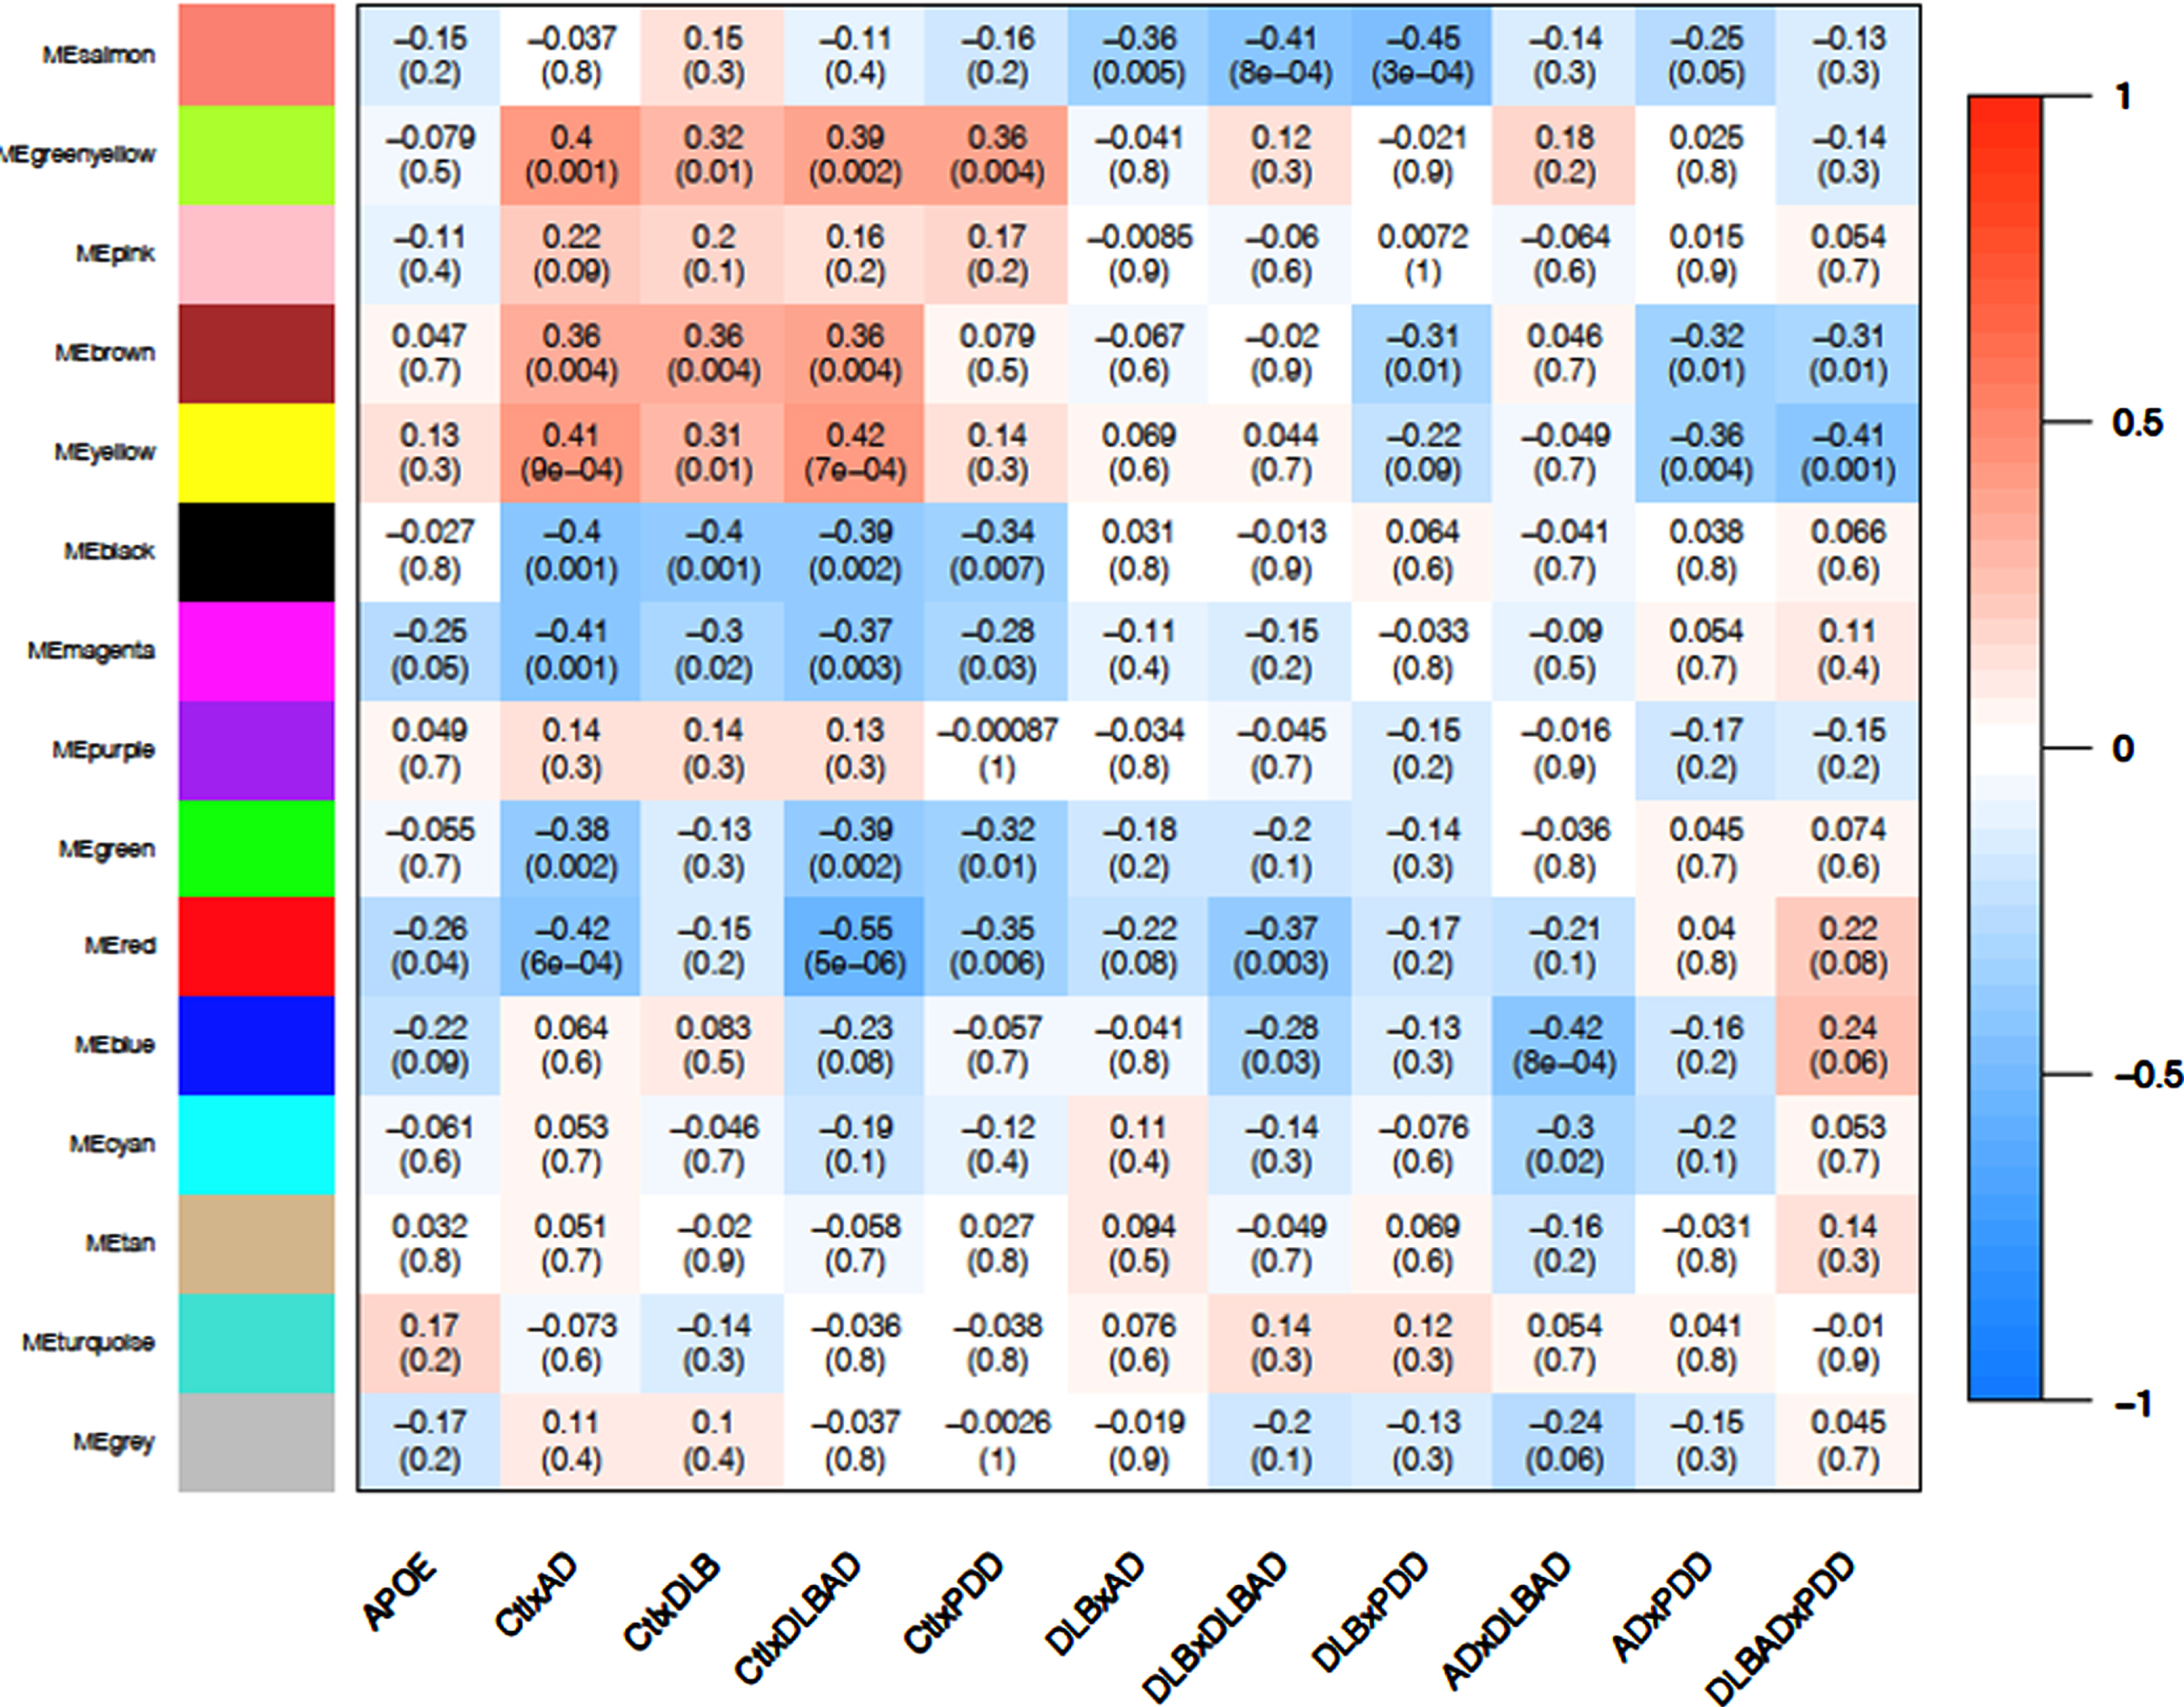 WGCNA Module-Trait Heatmap. Correlation of eigengenes for each module (top value) and p-value (bottom value in parenthesis) for APOE status (ɛ3/ɛ4 heterozygosity) and all 10 comparisons. Positive associations are in red and negative associations are in blue. Bolded boxes contain important associations discussed in the text.